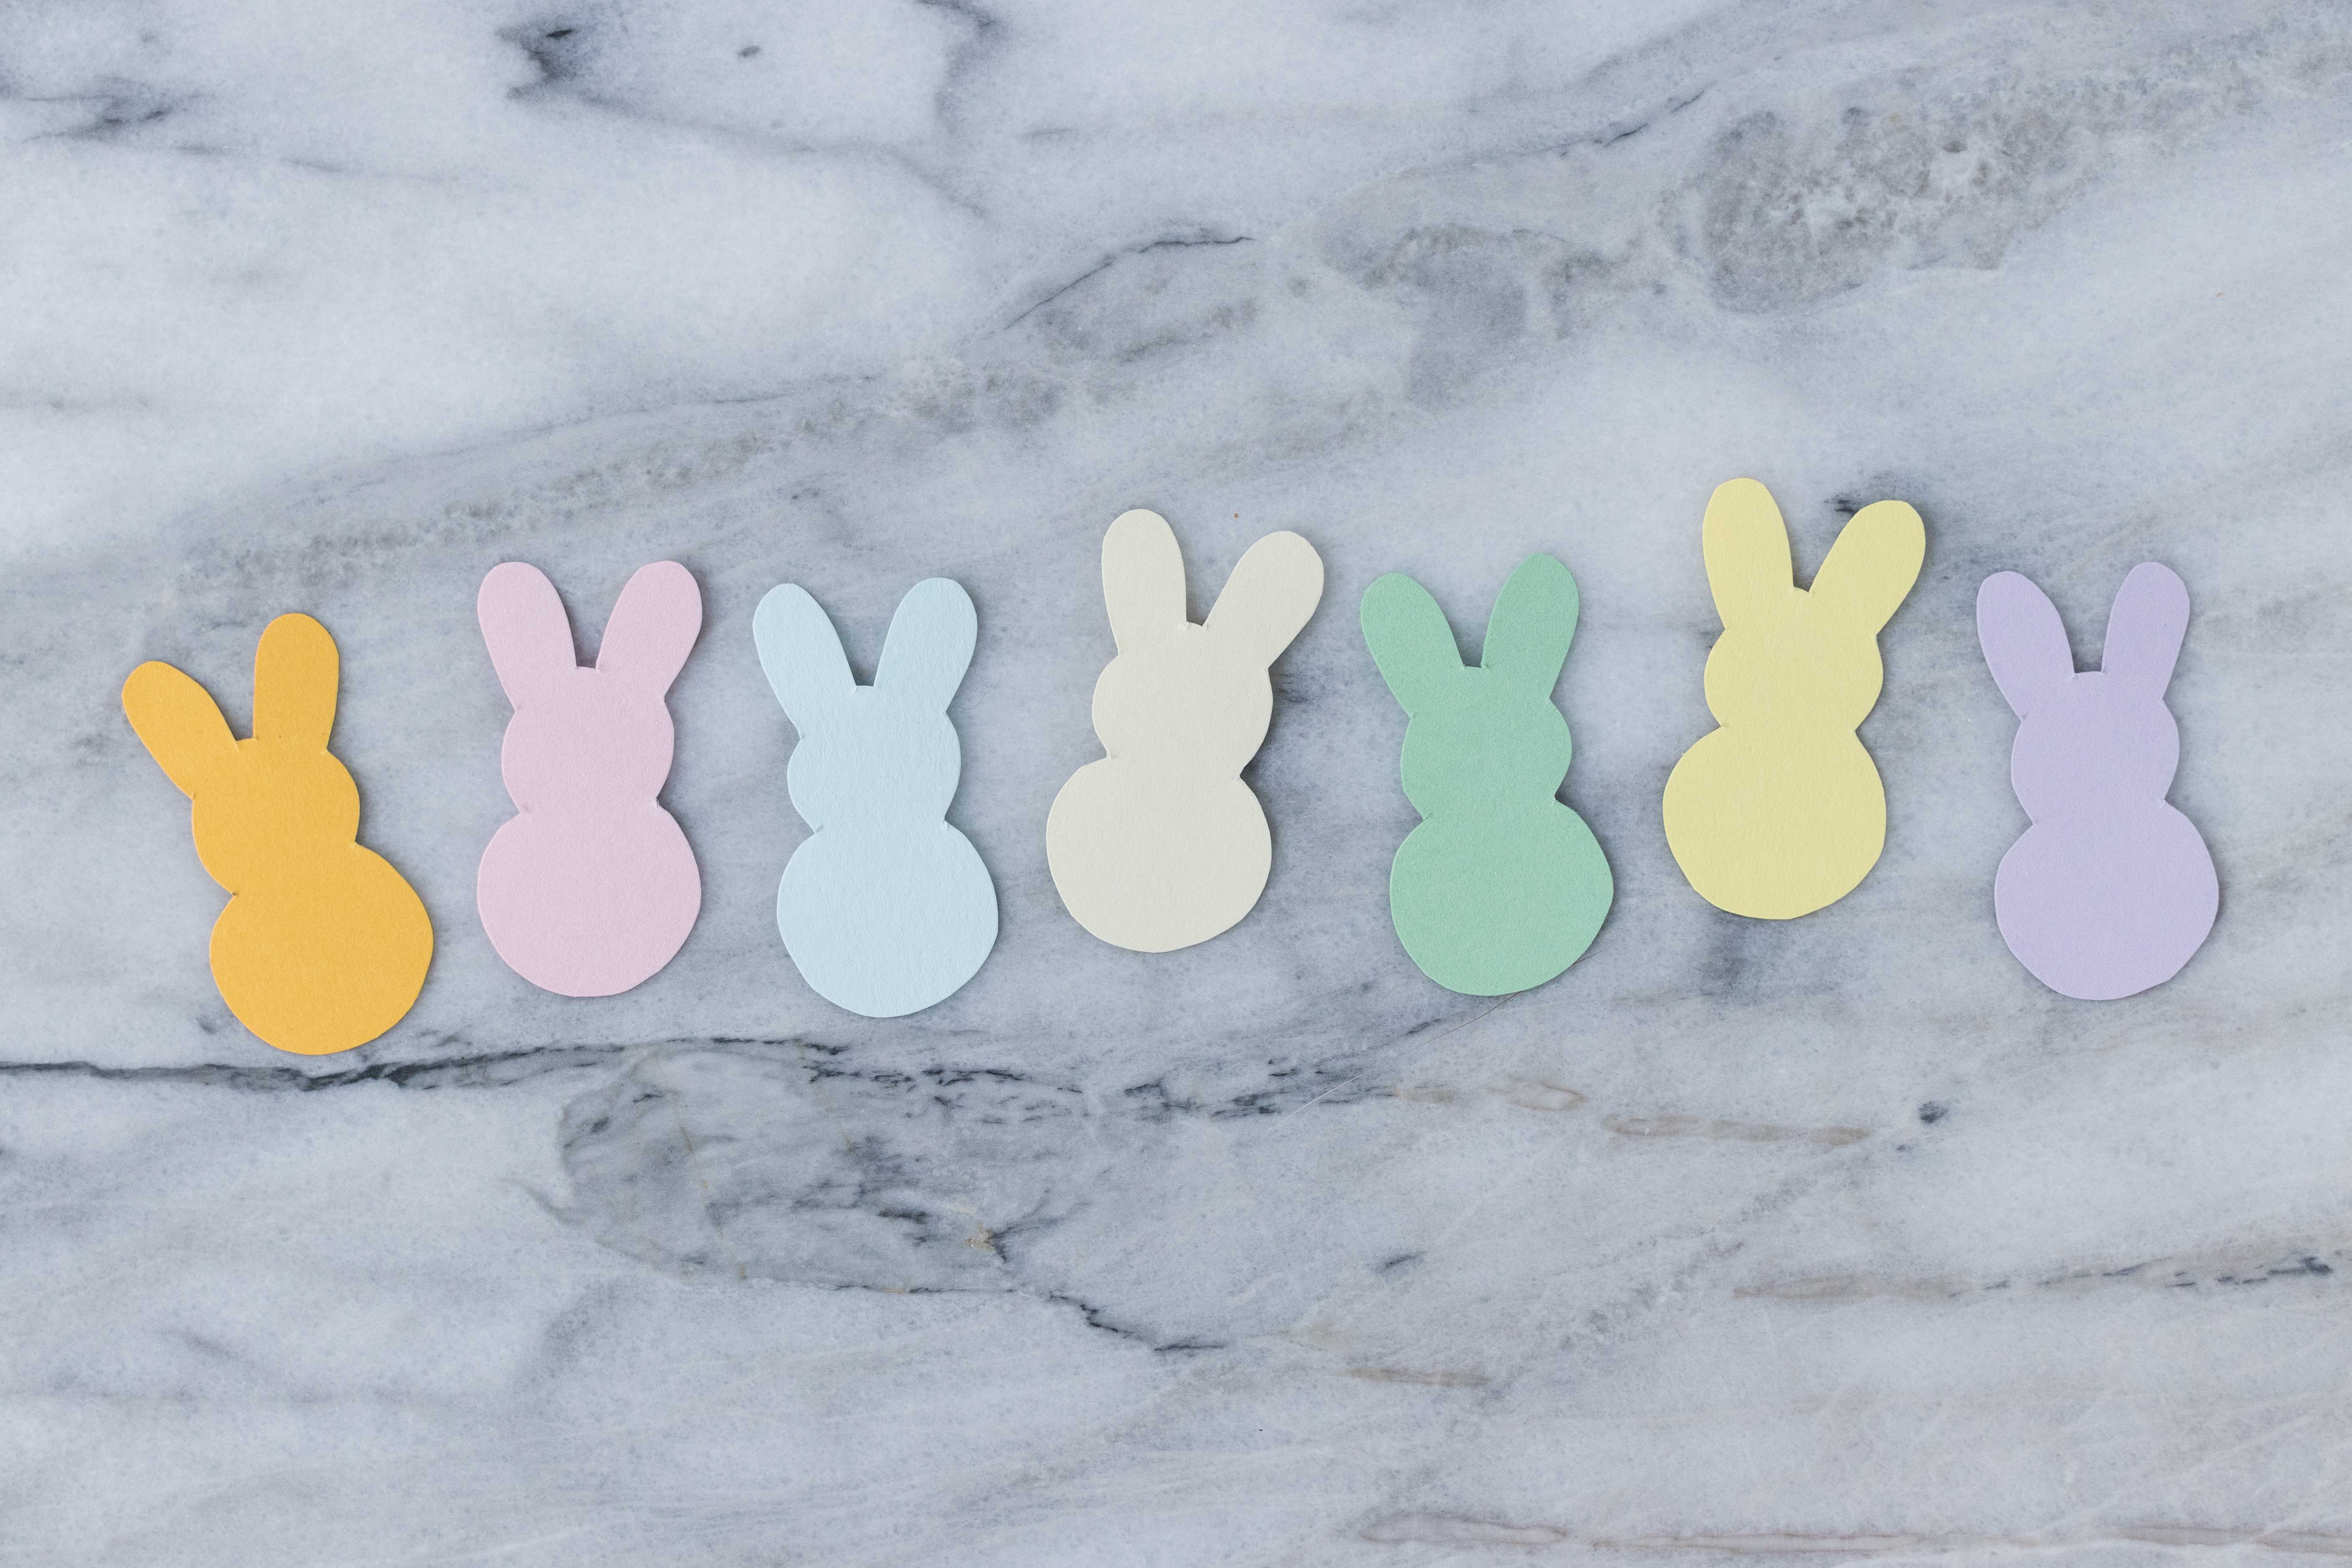 Tiny pastel Easter bunnies for a DIY Easter project! They are perfect for all sorts of Easter decorations. #Easter #DIY #bunnies | https://www.roseclearfield.com